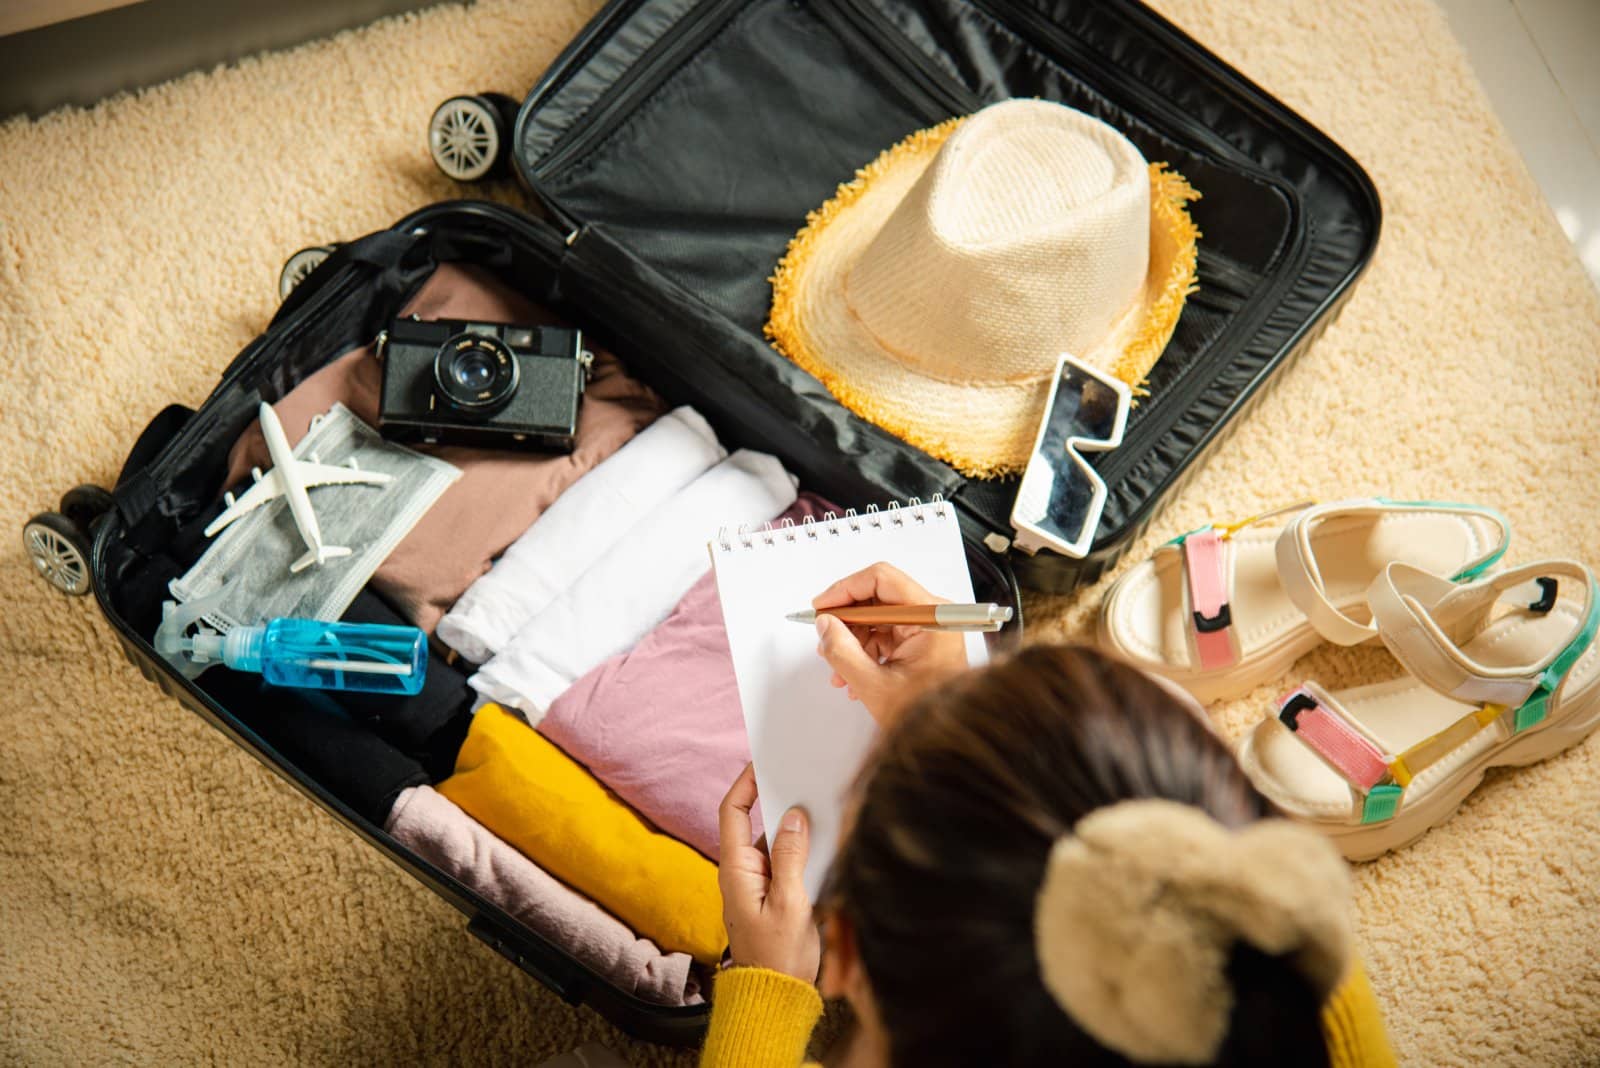 Image Credit: Shutterstock / Sorapop Udomsri <p>Pack too much and you’re living out of a suitcase. Pack too little? Good luck surviving the trip without essential gear. Parents can’t seem to pack just right.</p>